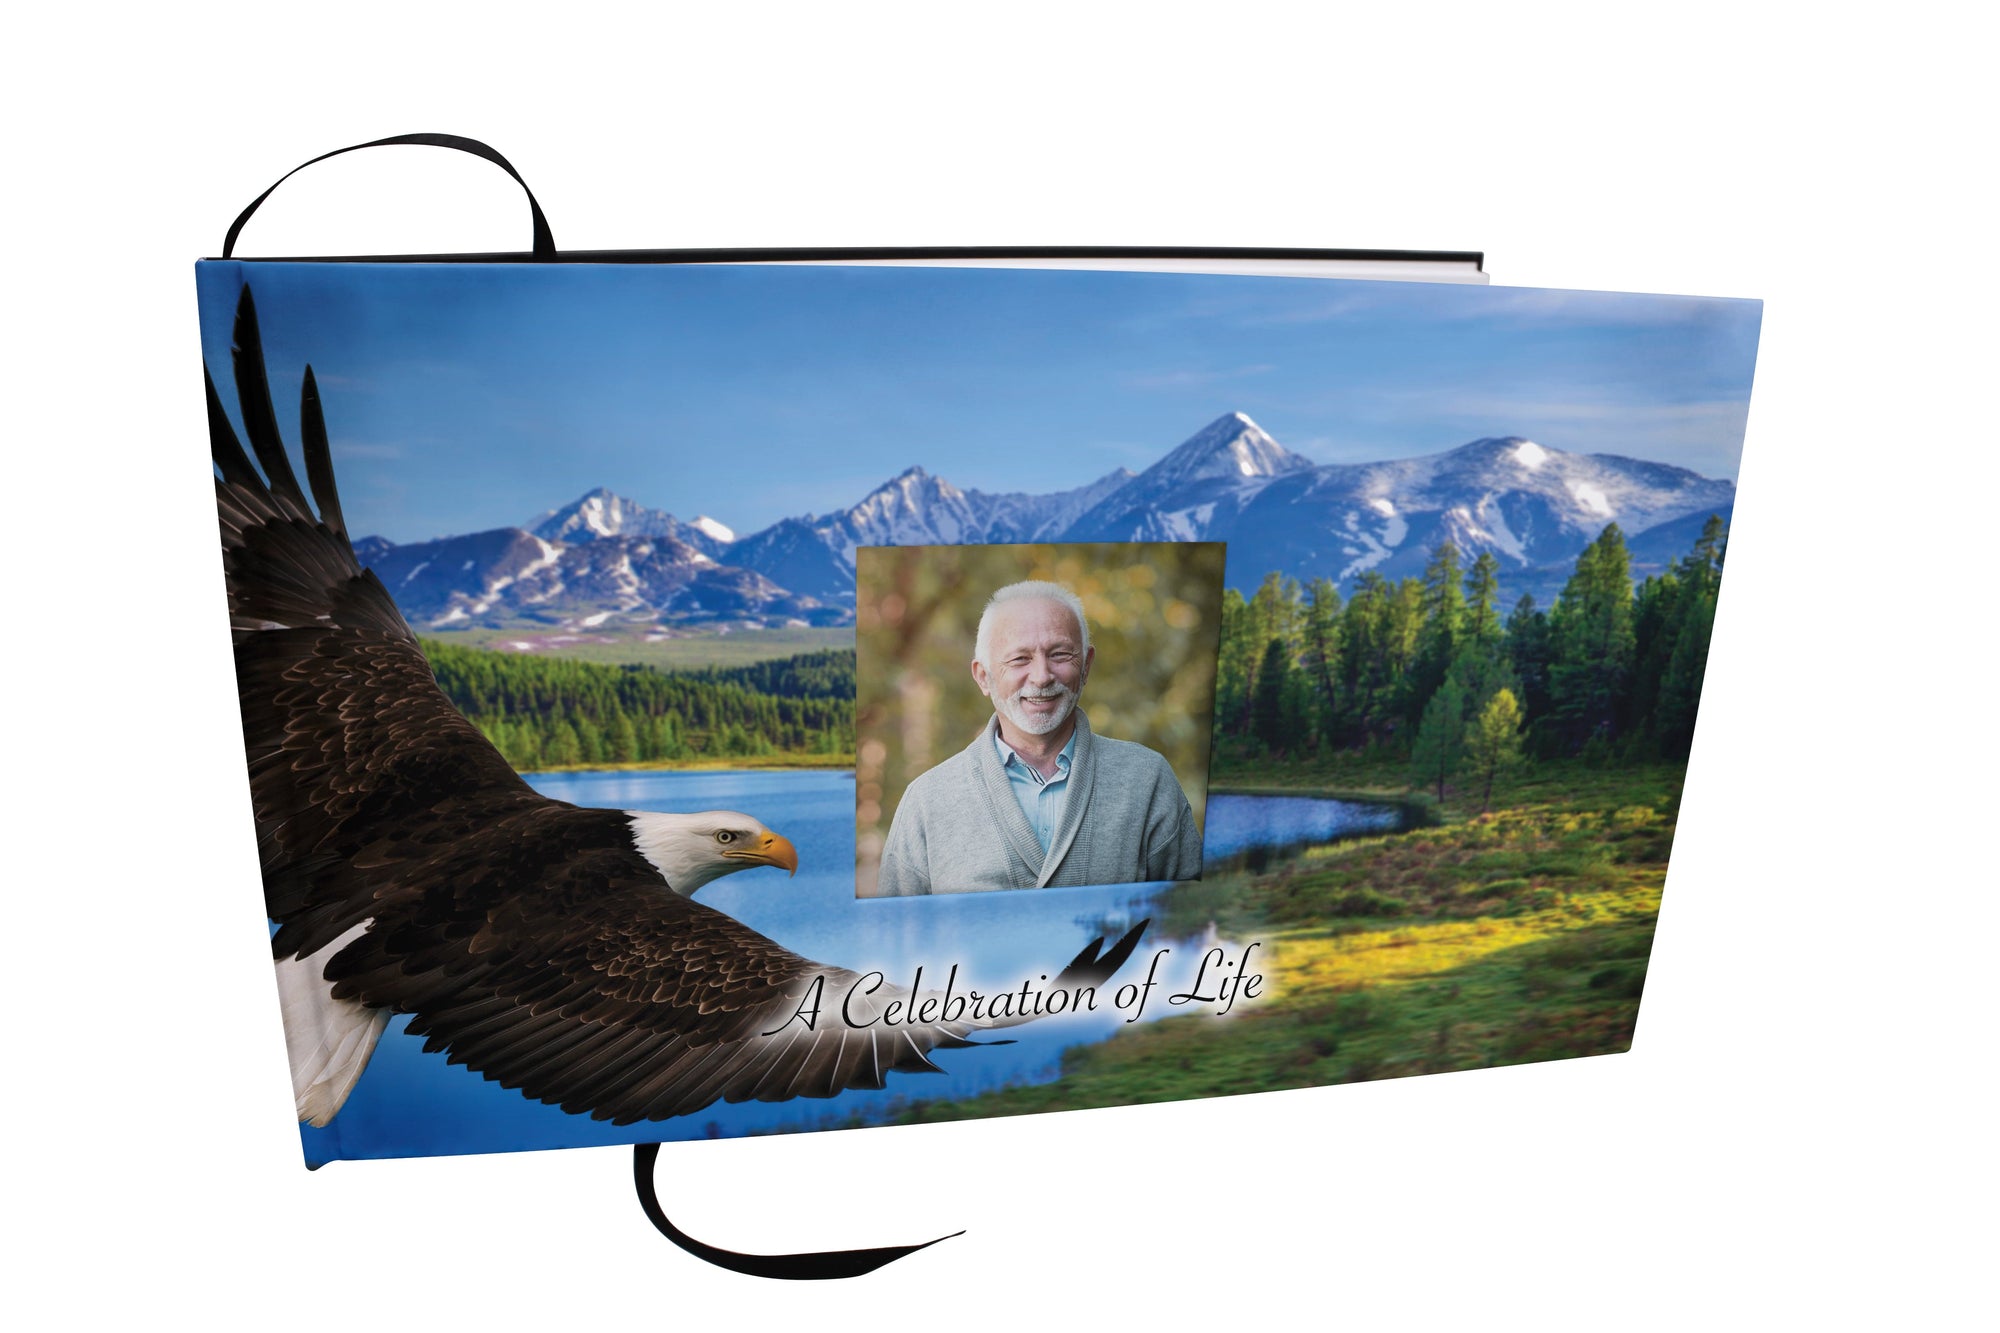 Commemorative Cremation Urns Bald Eagle Matching Themed 'Celebration of Life' Guest Book for Funeral or Memorial Service